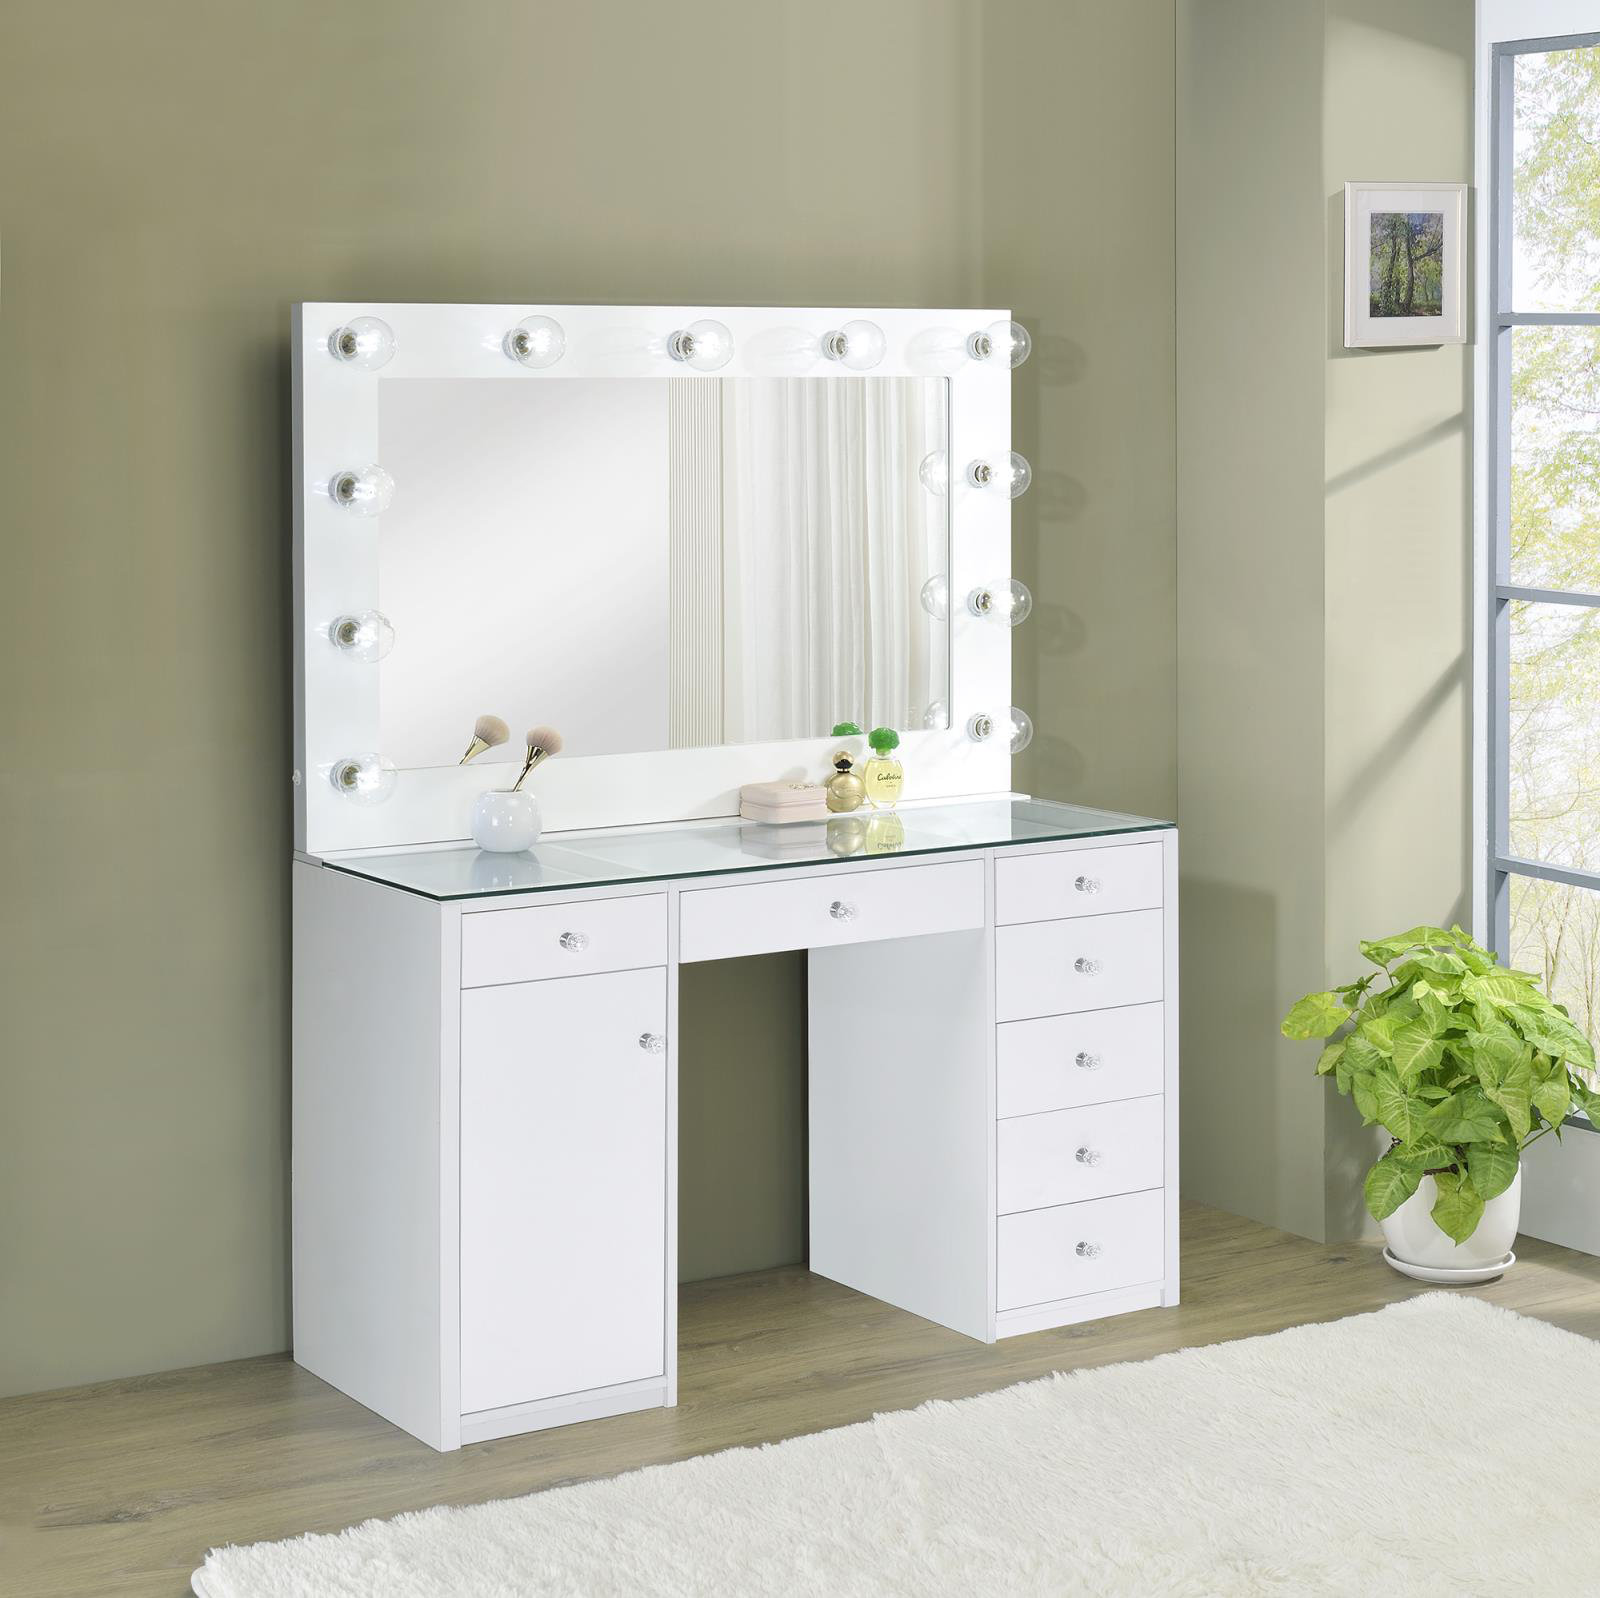 Impressions Vanity Desk with Mirror and Lights, Makeup Desk Slaystation PRO  2.0 with Clear Tempered Glass Top and 3 Drawers, Bedroom Makeup Vanity